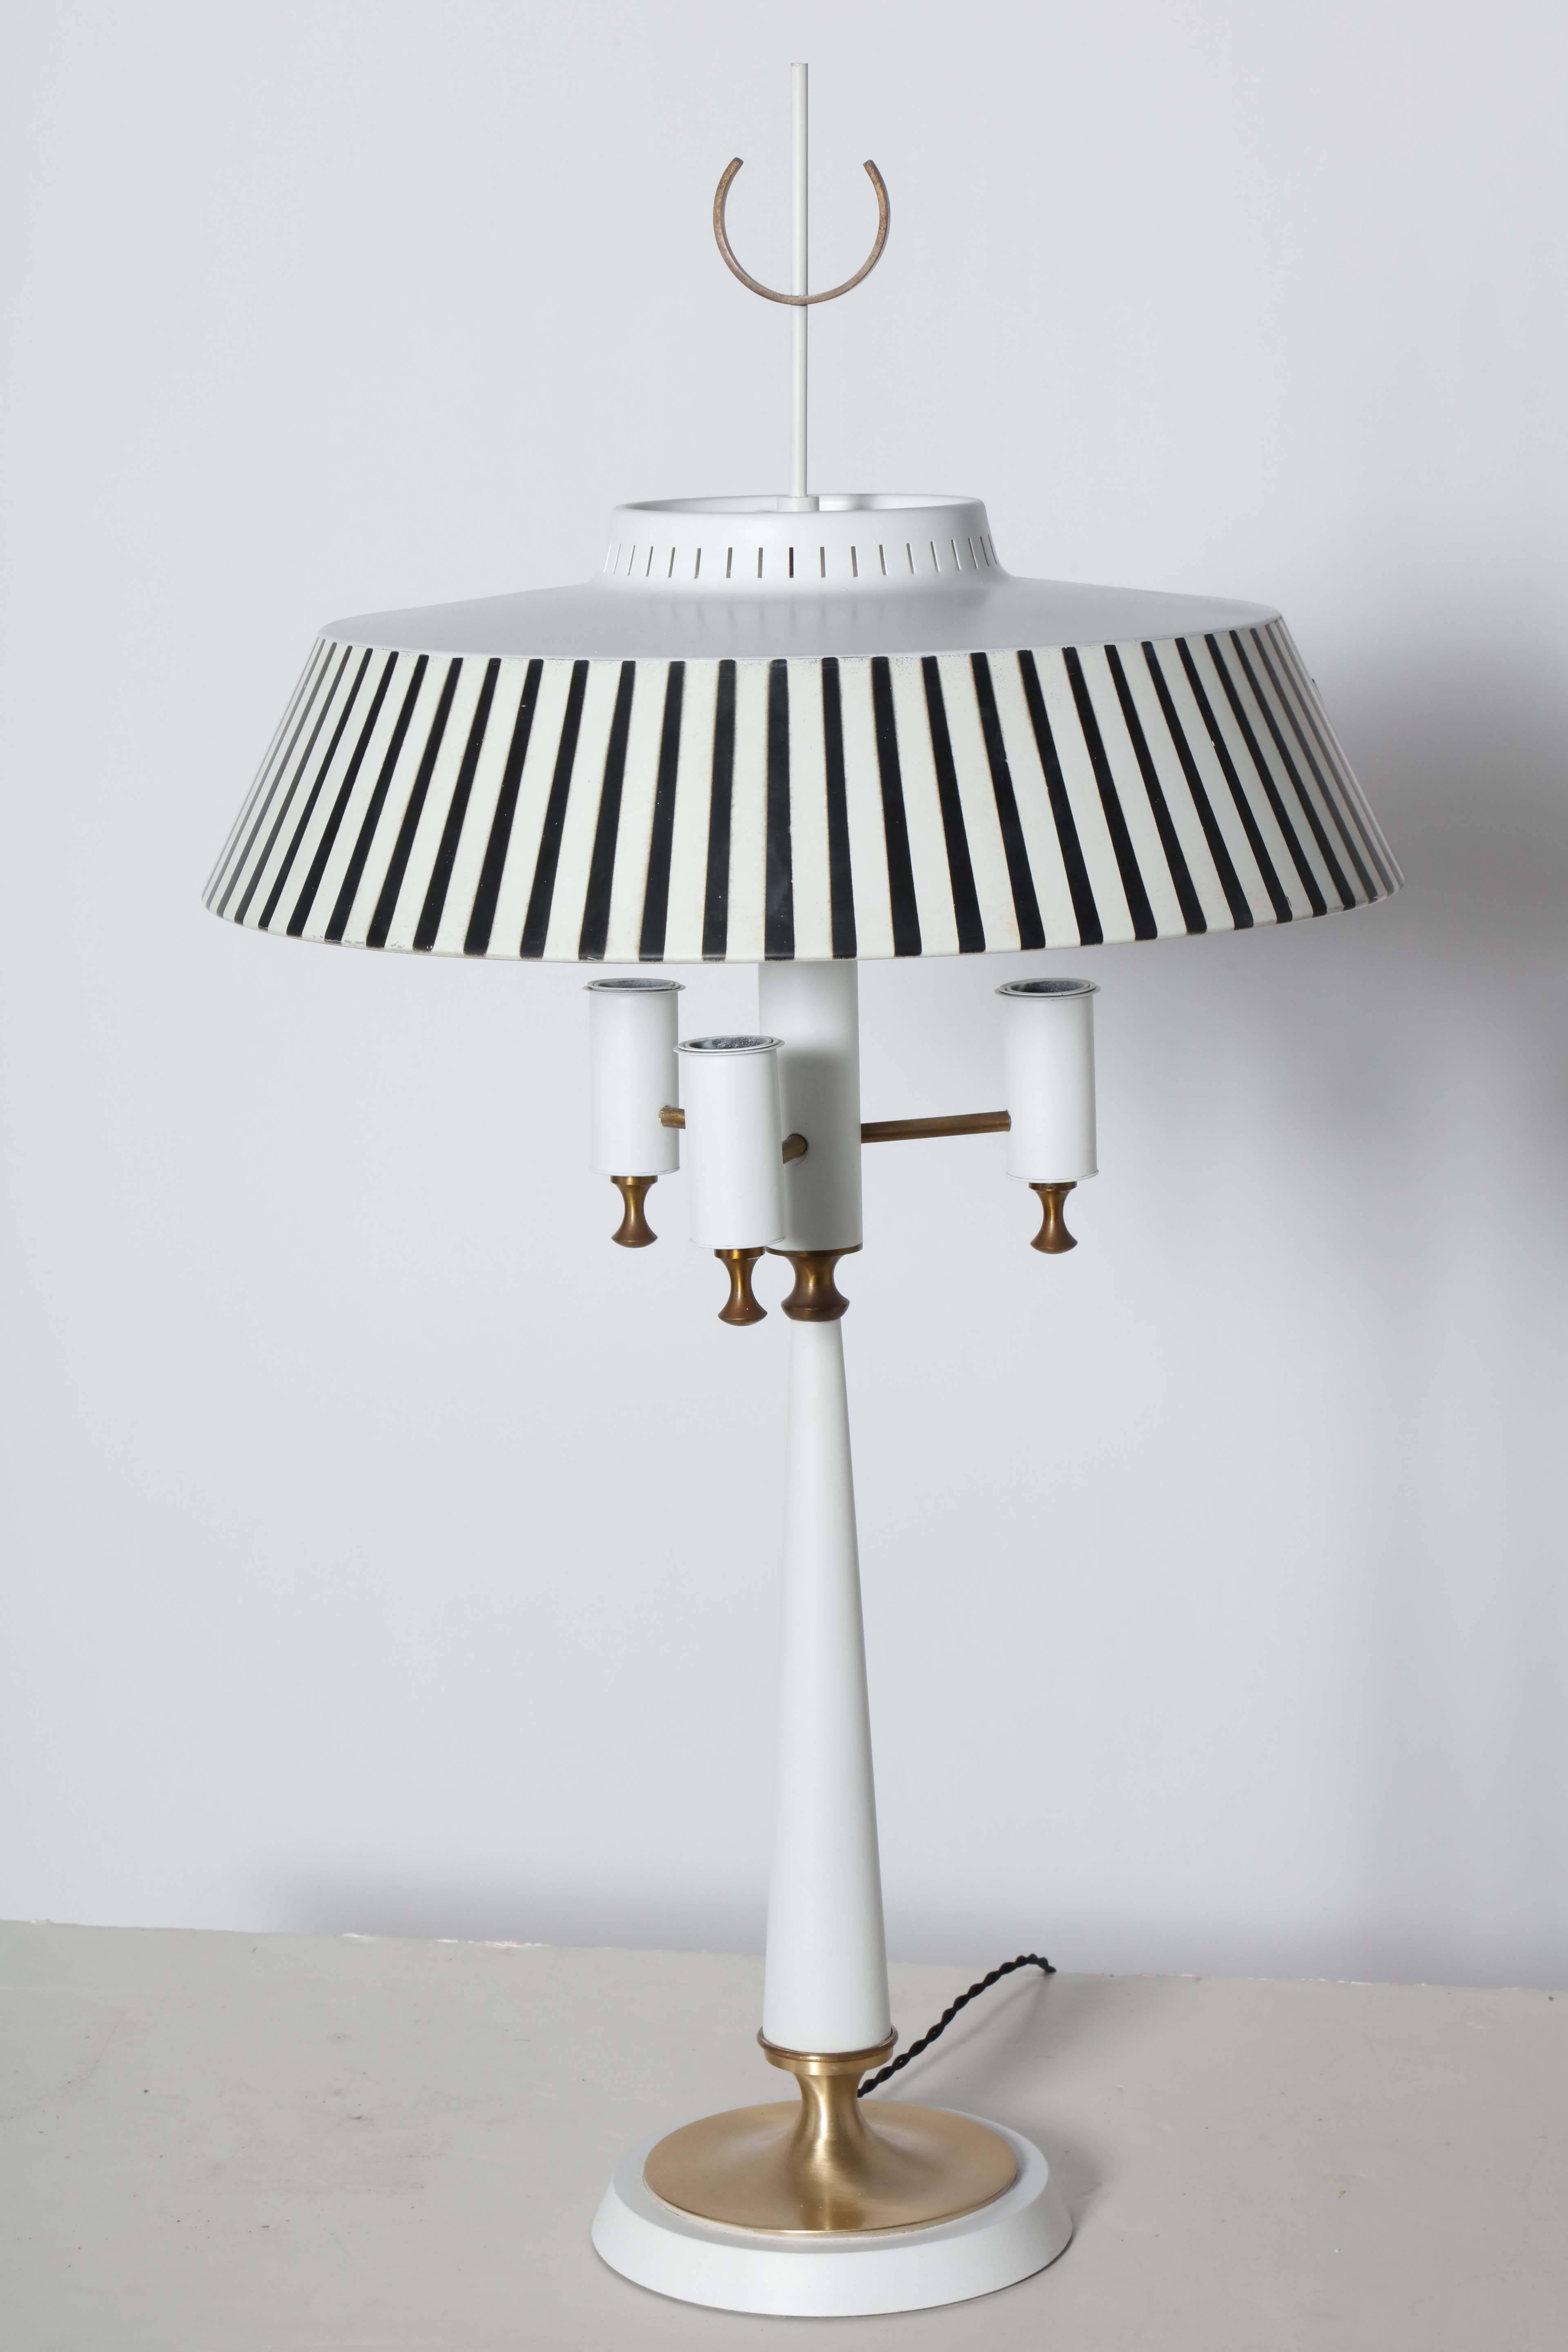 Gerald Thurston for Lightolier White Table Lamp with Striped Shade, 1950's.  Featuring a White stem, three Brass arms, triple White enameled candlestick sockets, stenciled Black and White striped painted metal shade, White perforated top, circular